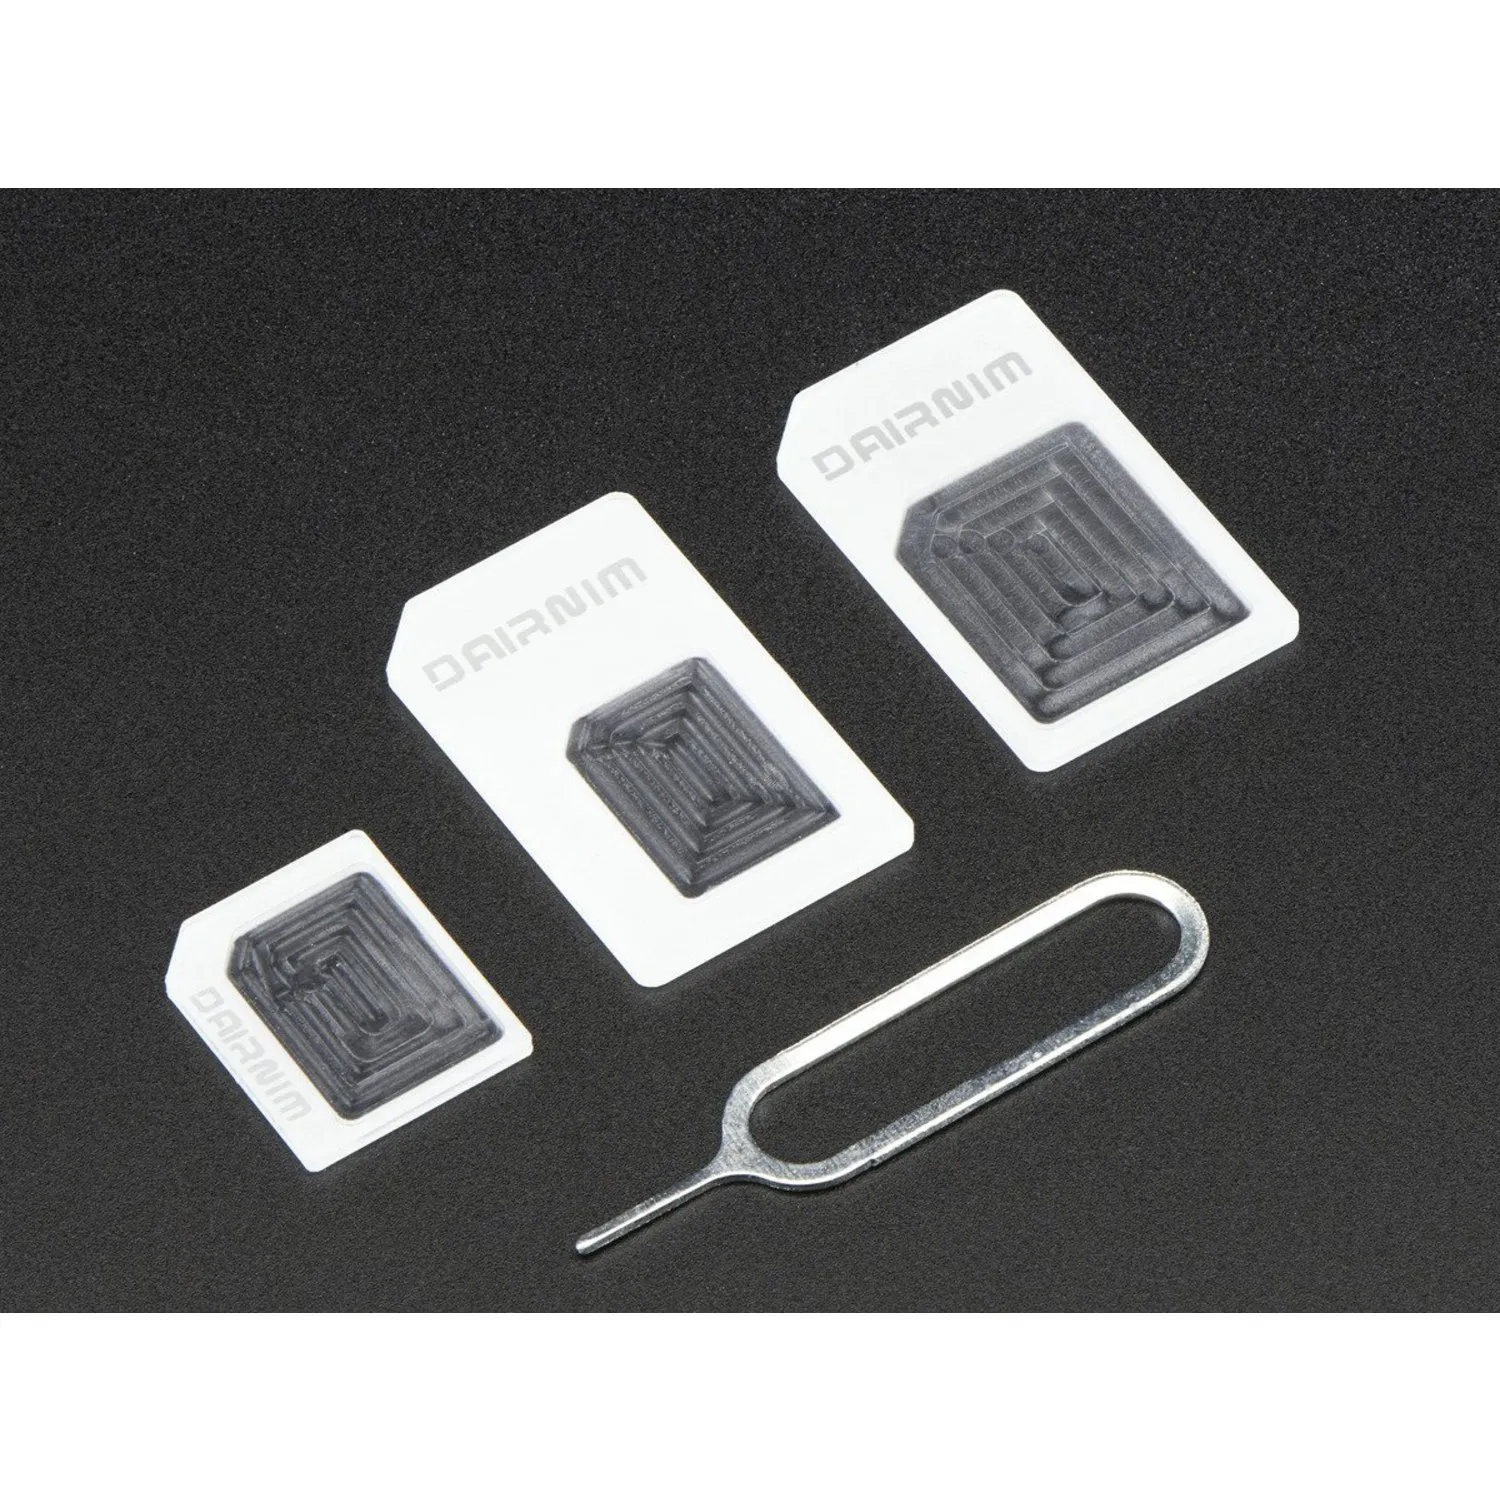 Photo of SIM Card Adapters - Pack of 3